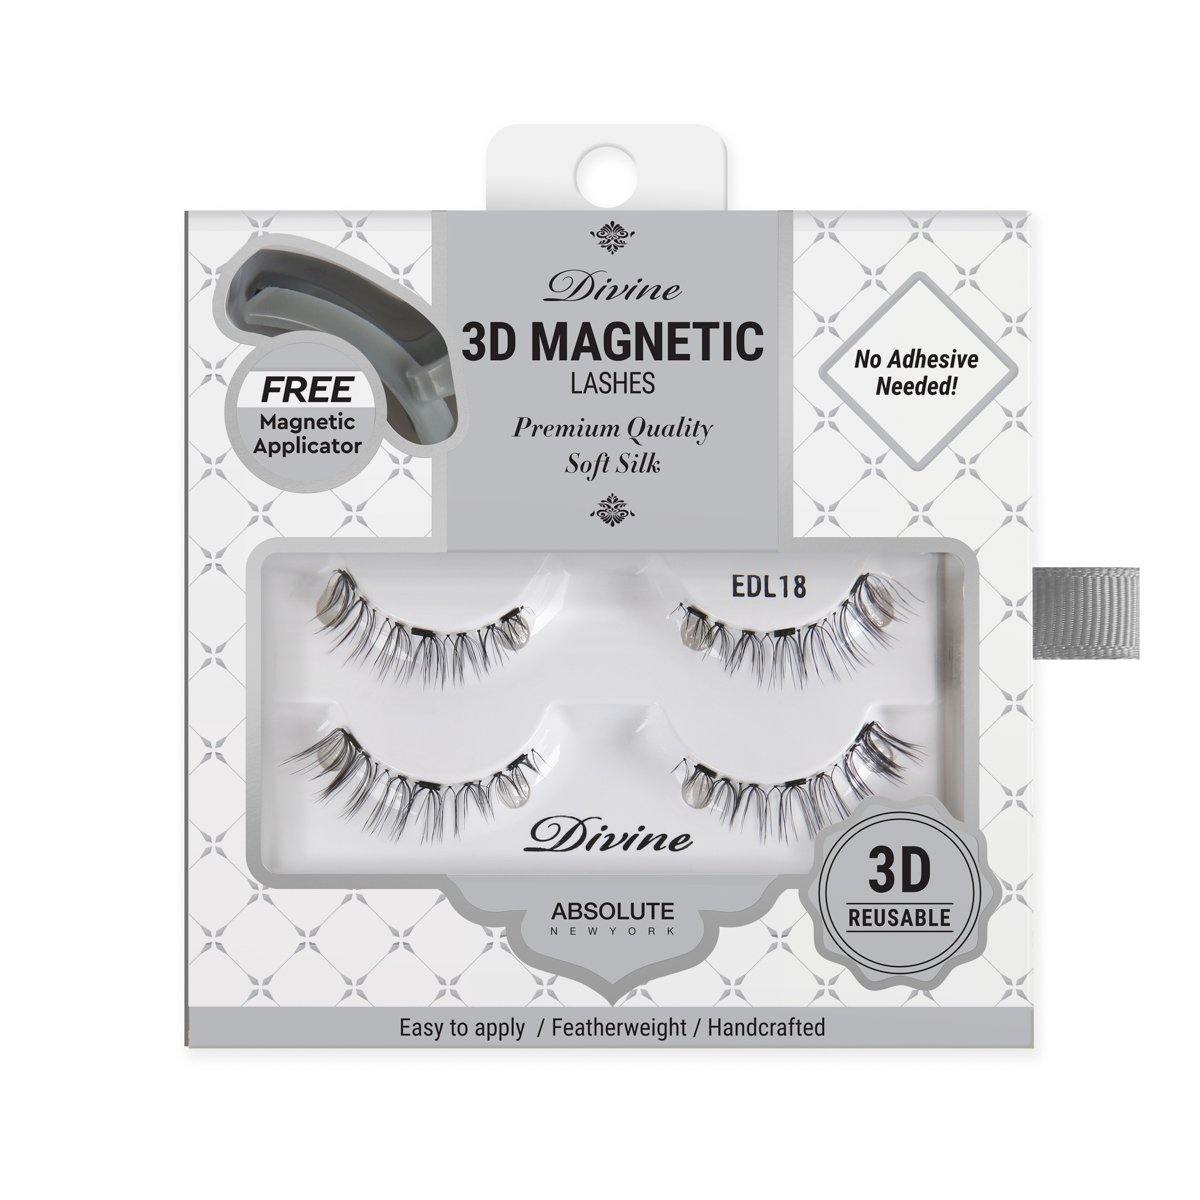 Absolute New York Divine 3D Magnetic Lashes